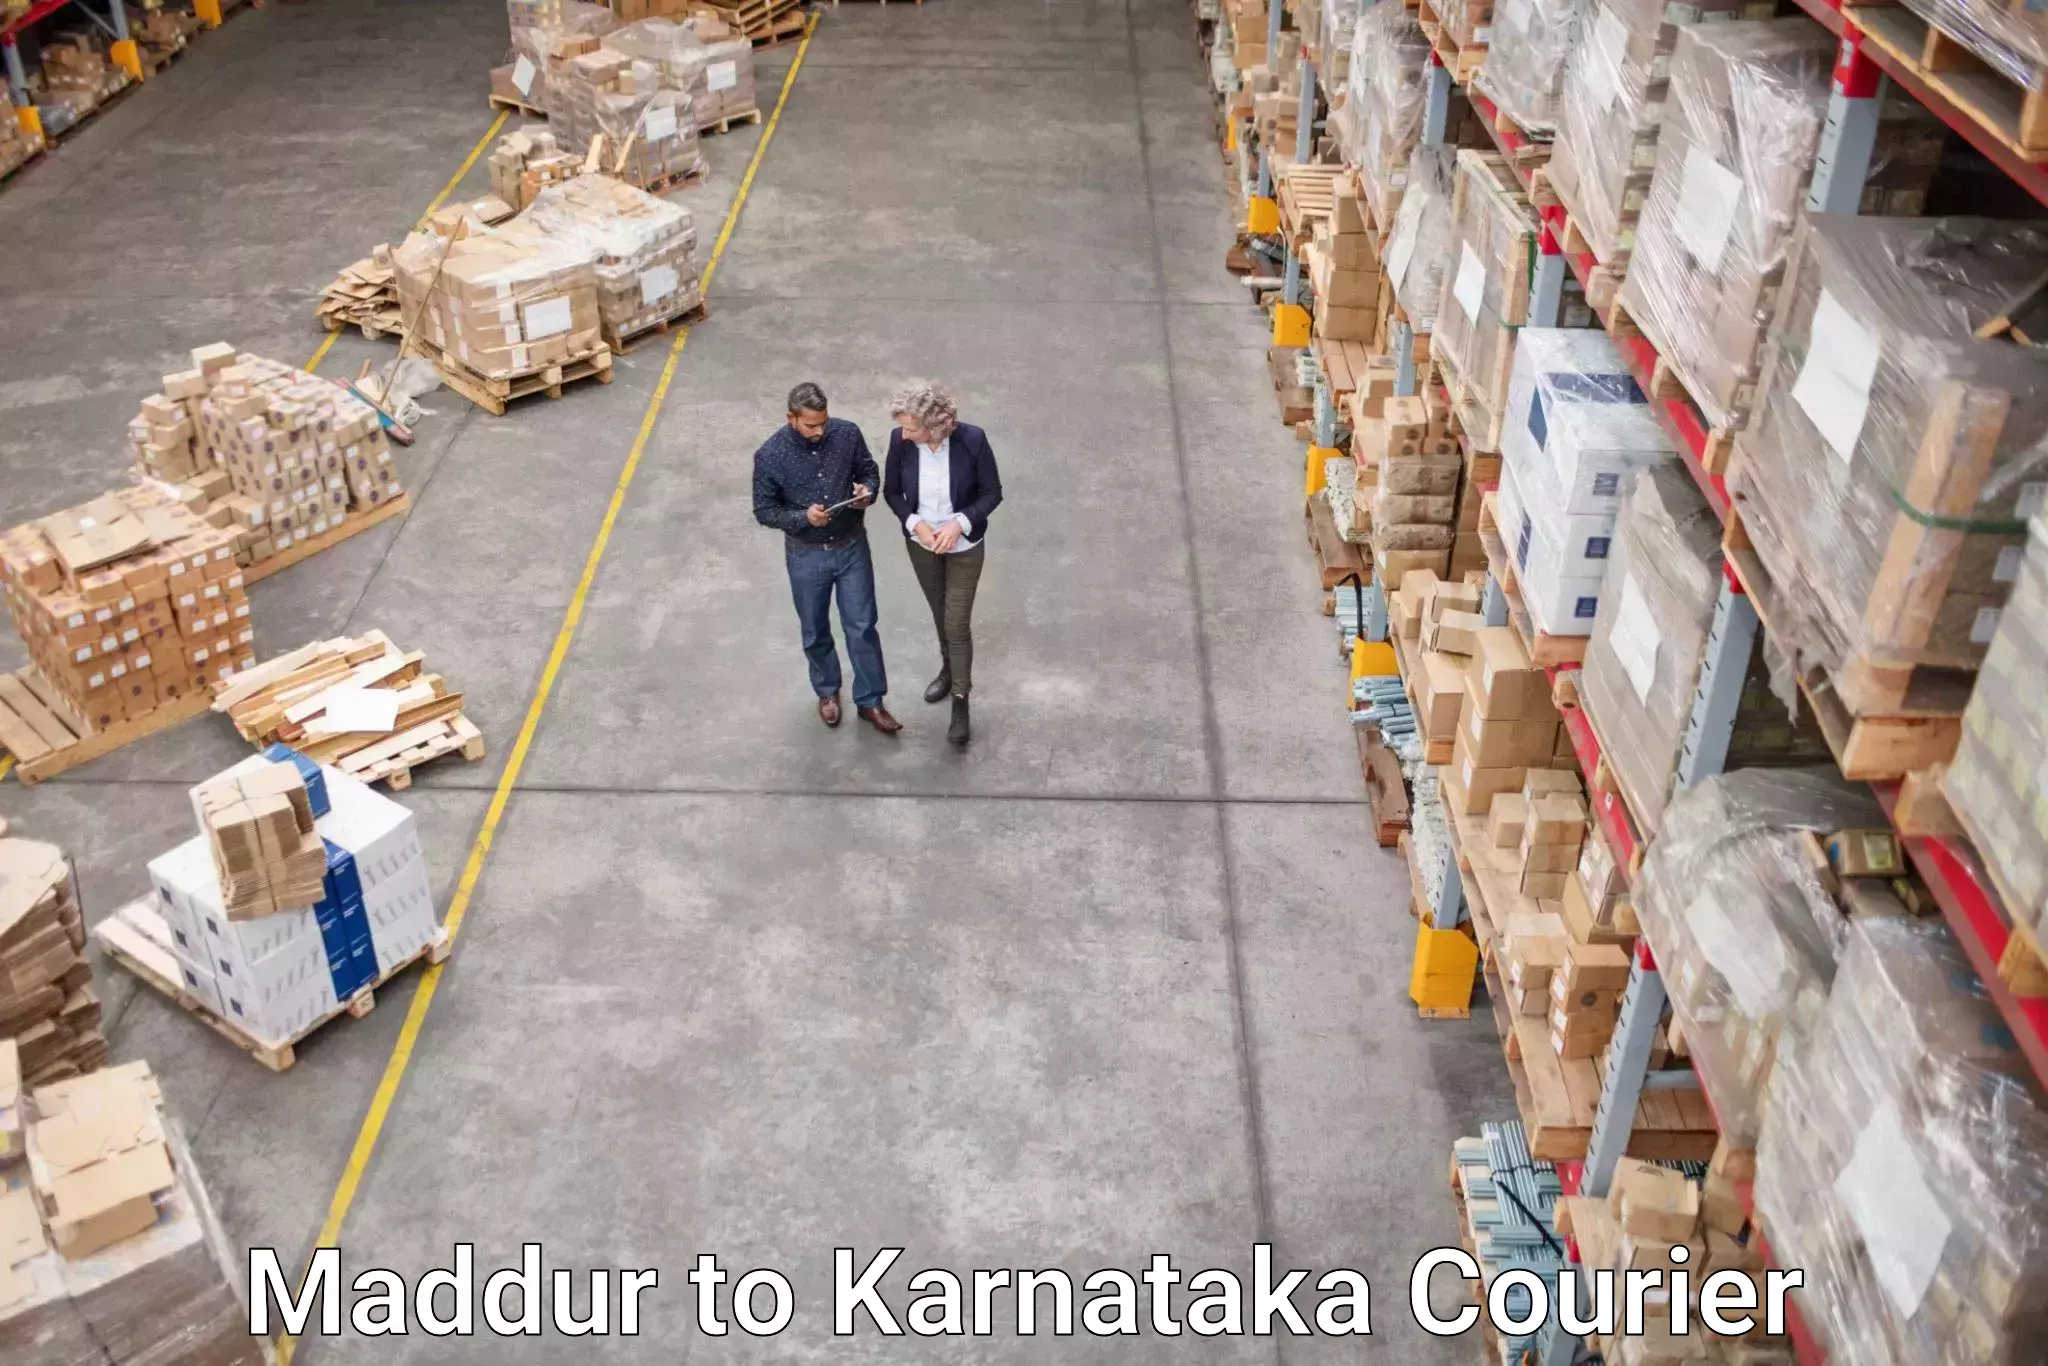 Reliable courier service Maddur to Turuvekere